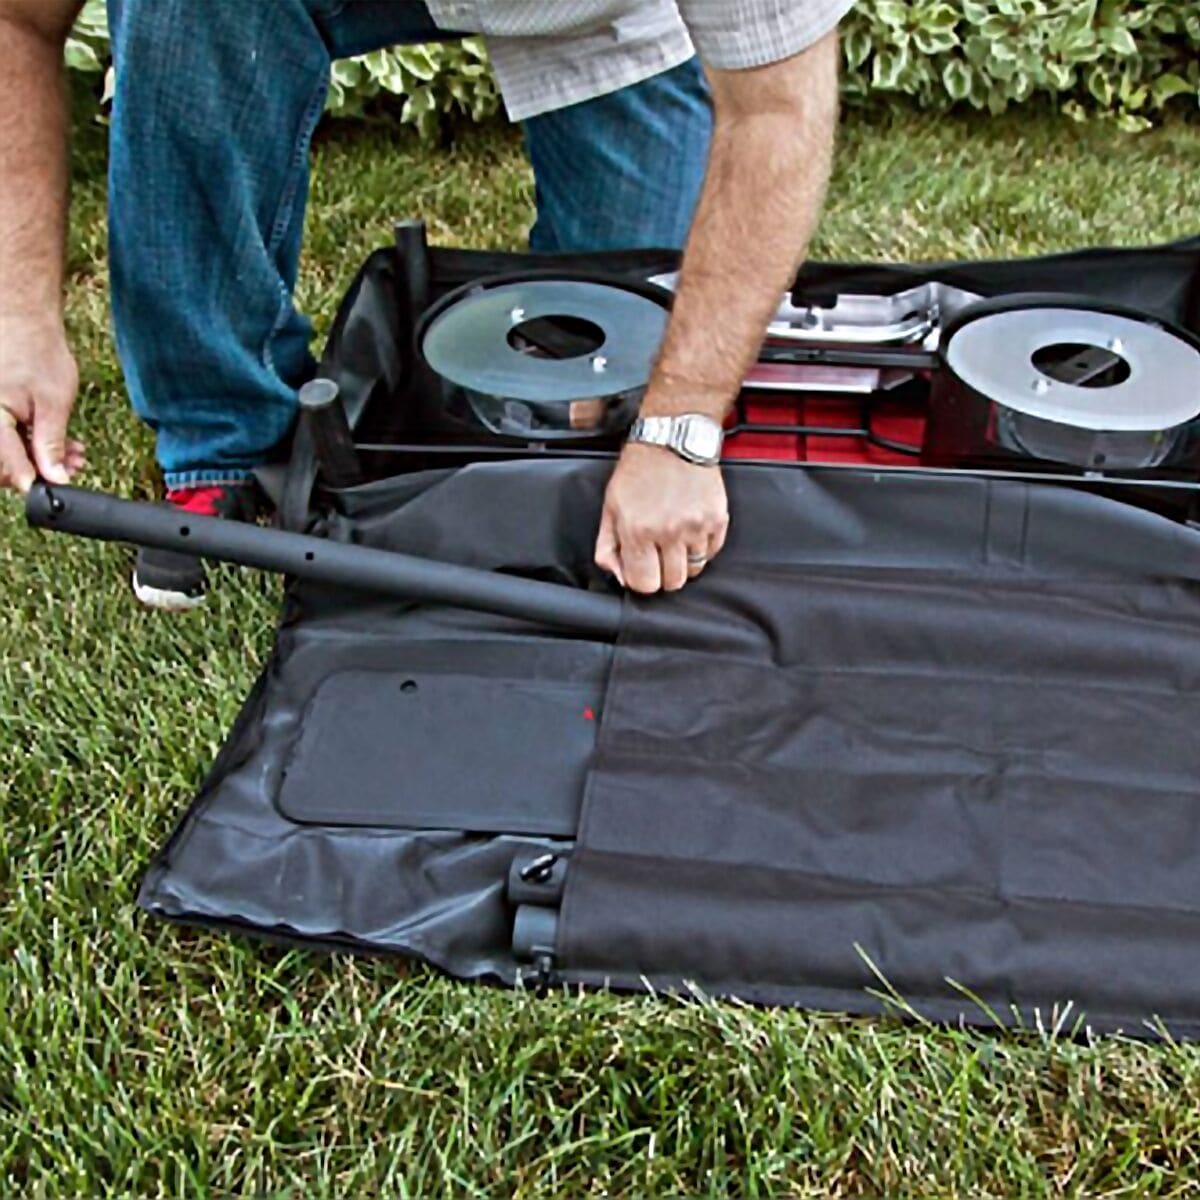  Camp Chef Carry Bag - 2-Burner Camp Stove or Deluxe BBQ Box - Hike & Camp